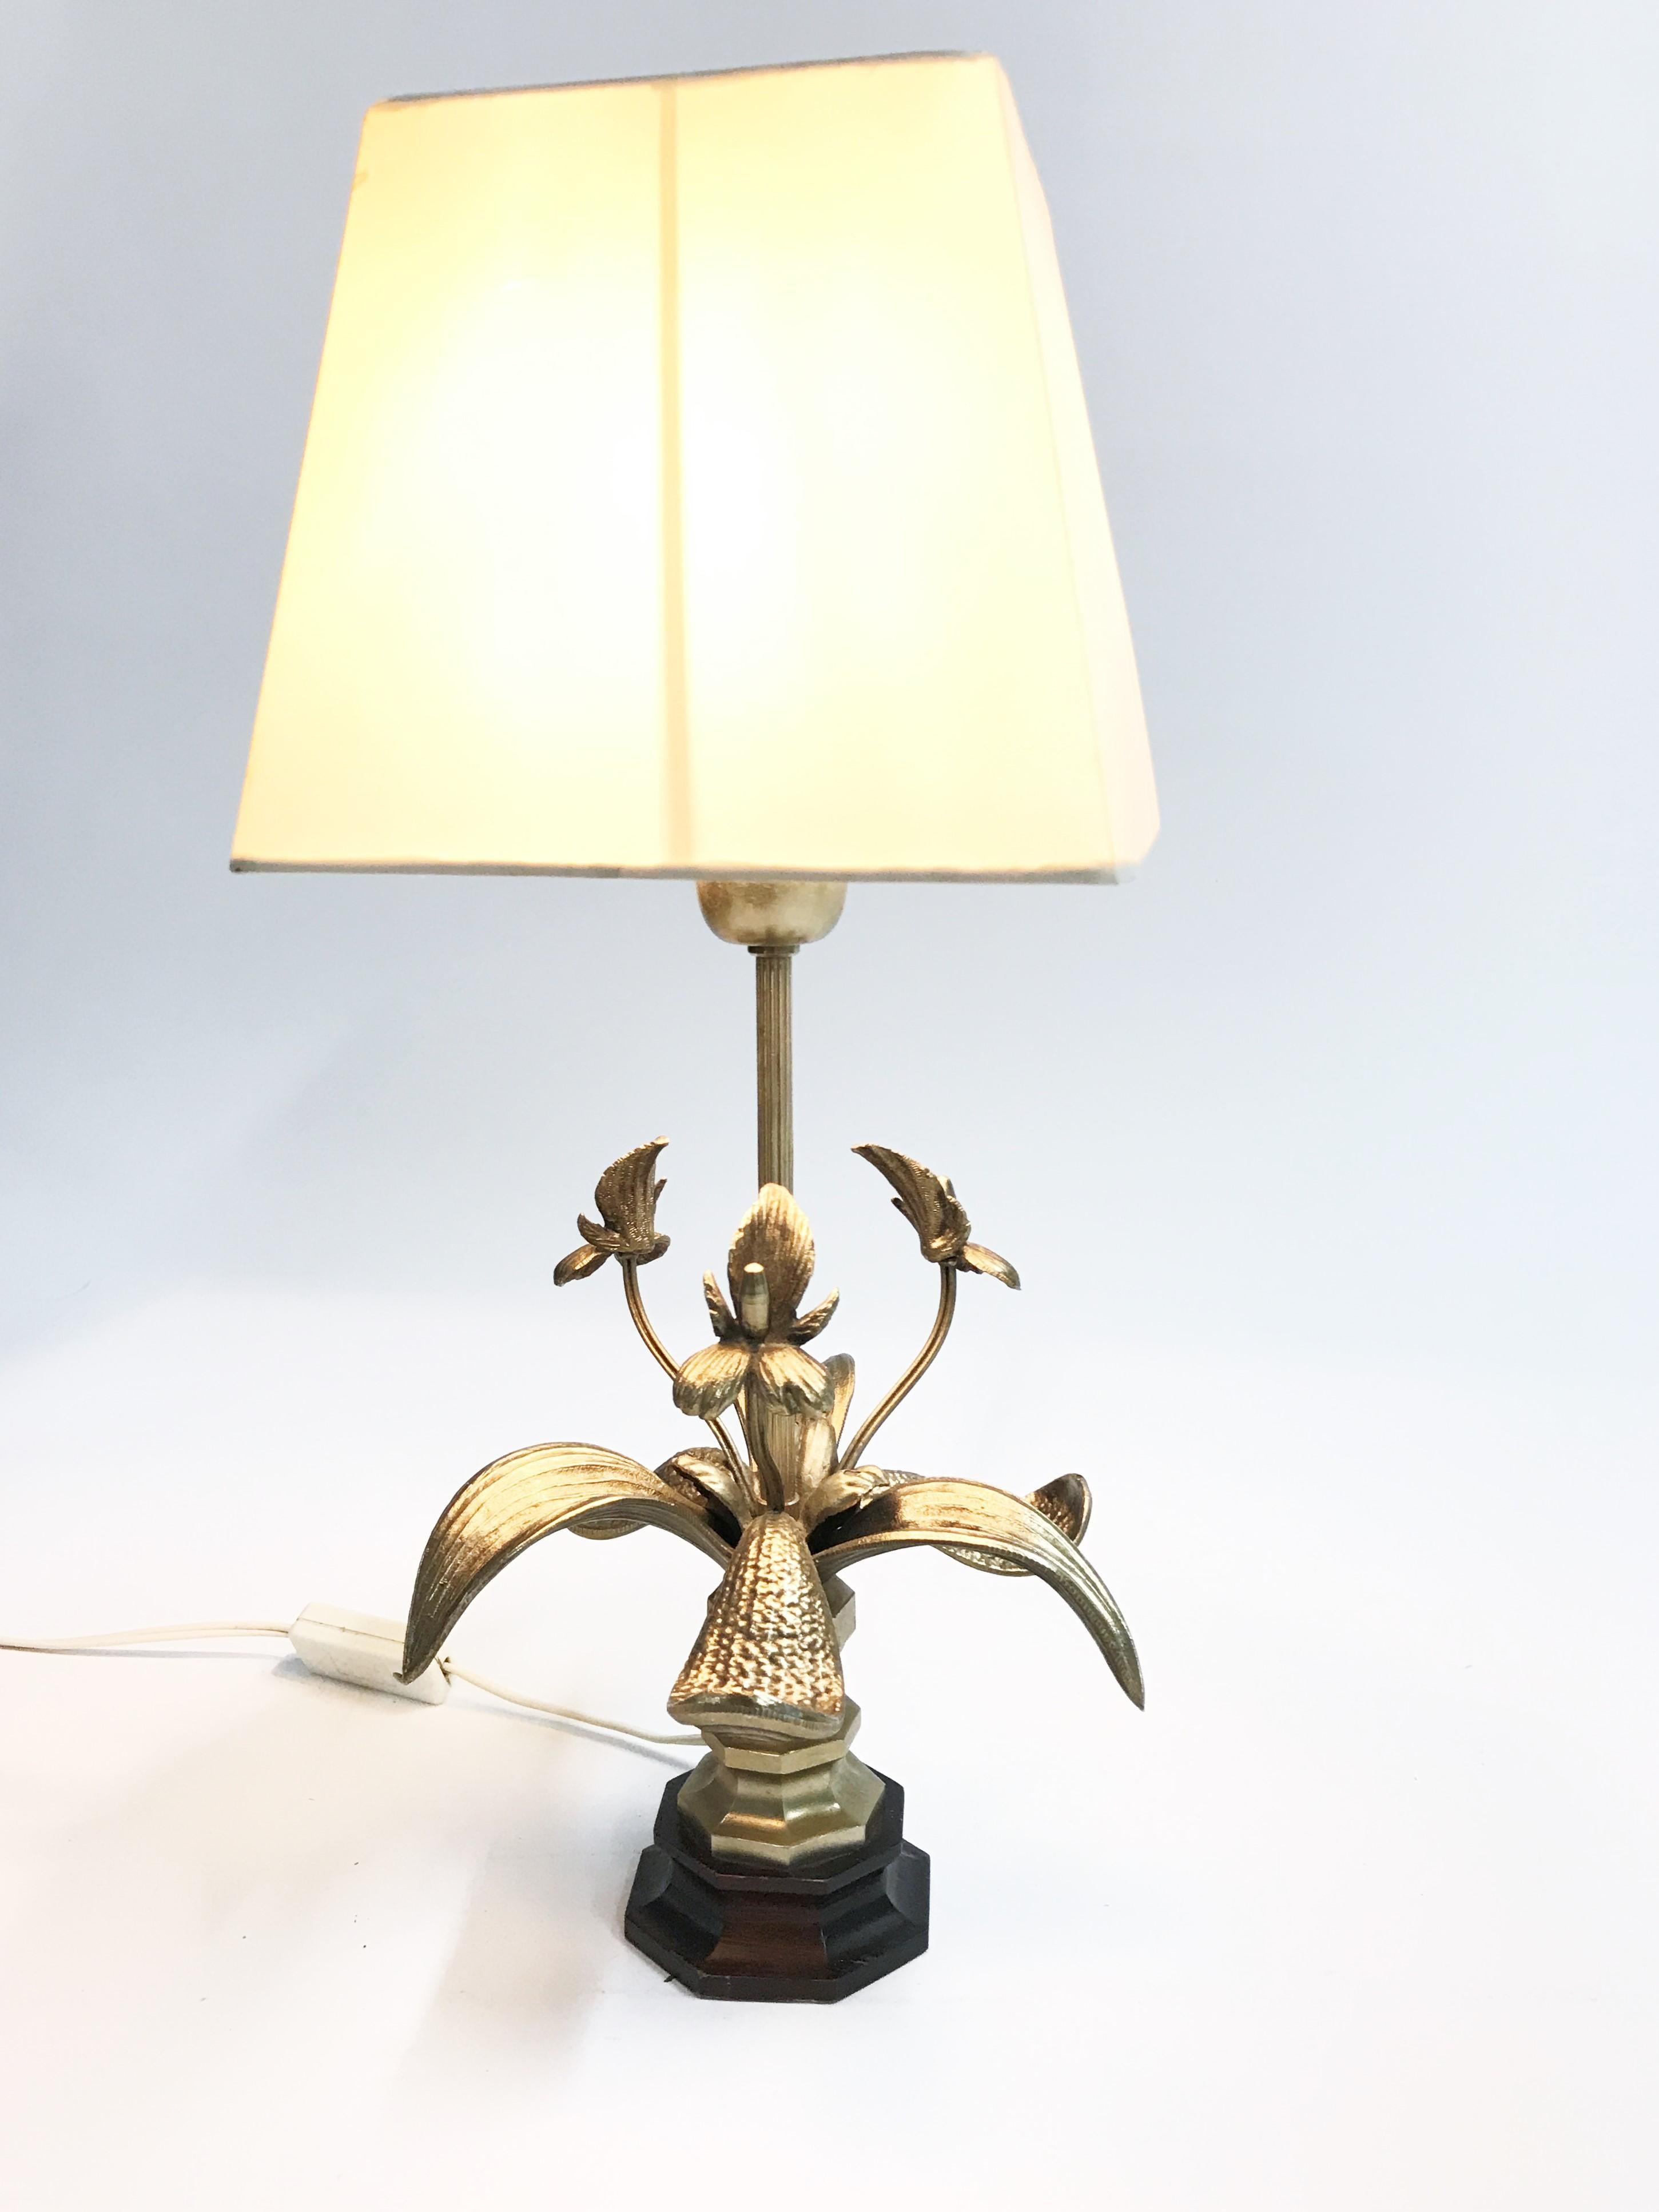 Sculptural midcentury table lamp made from tin on a wooden base.

The leafs and flowers are beautifully detailed.

1960s - Belgium

Tested and ready to use with a regular E27 light bulb.

Measures: Height 48cm/18.89